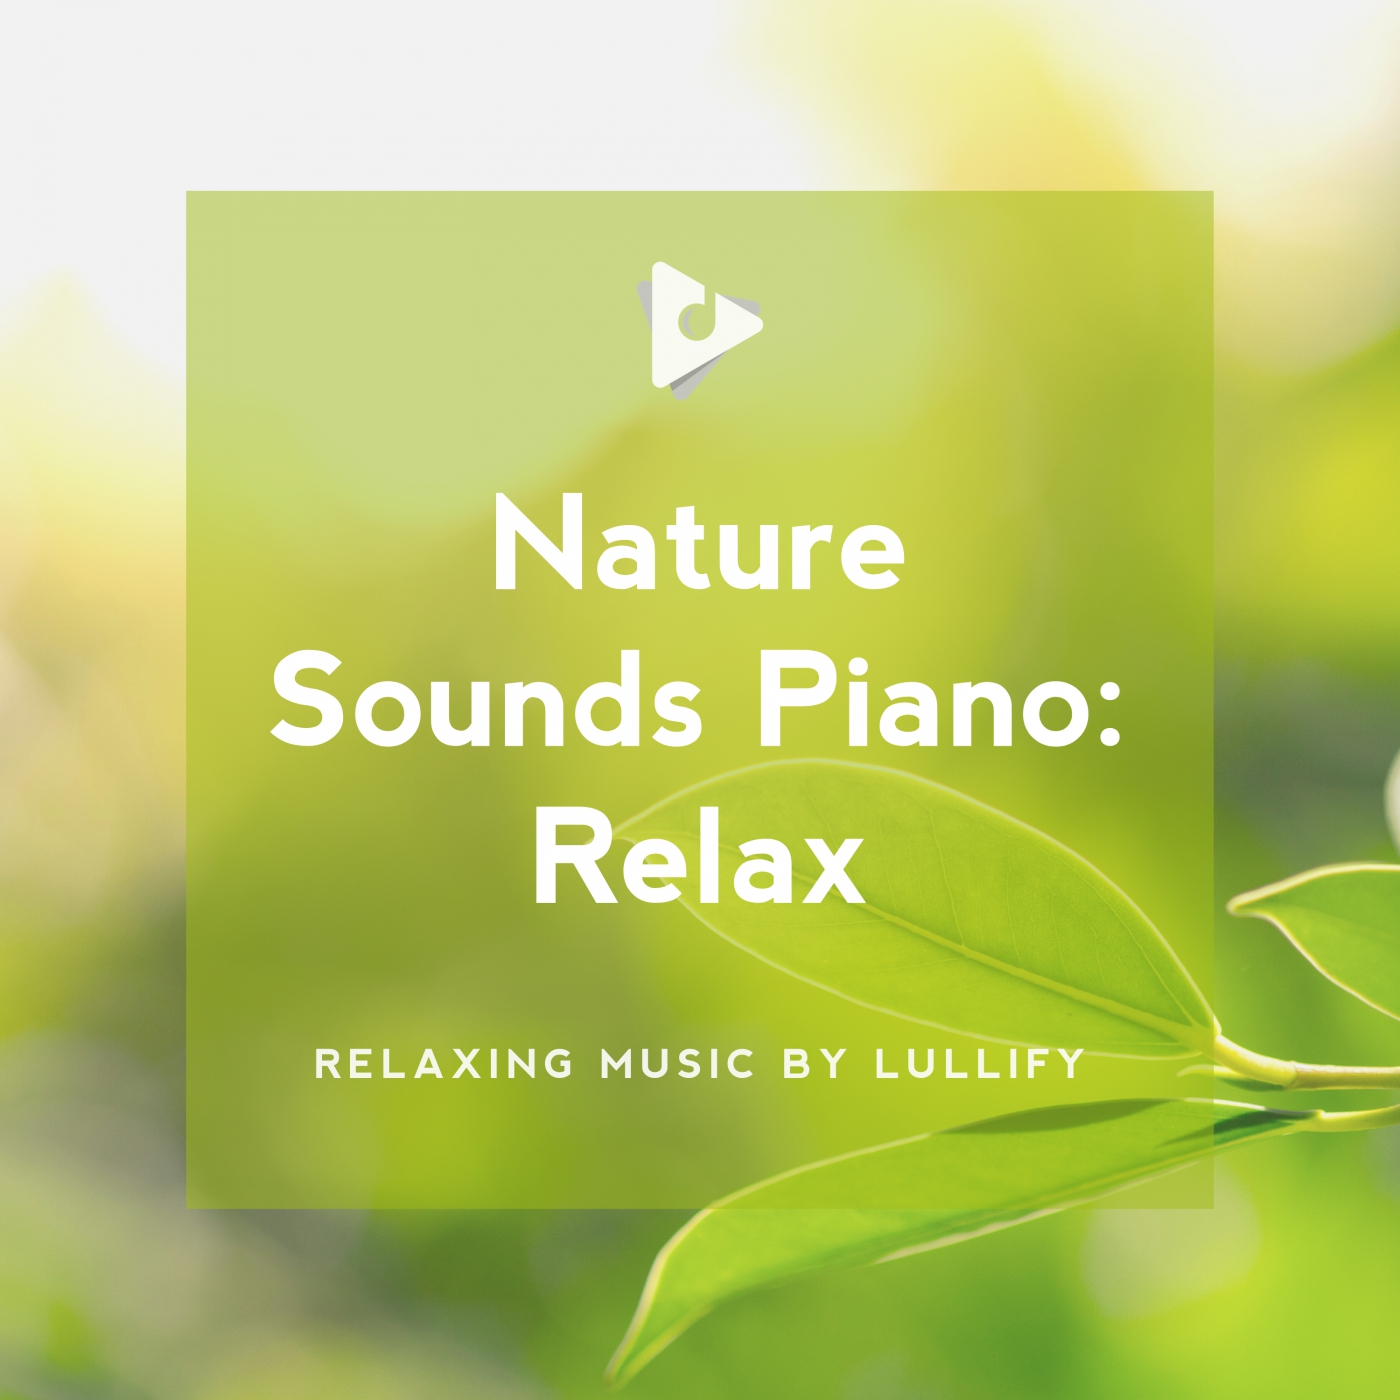 Nature Sounds Piano: Relax